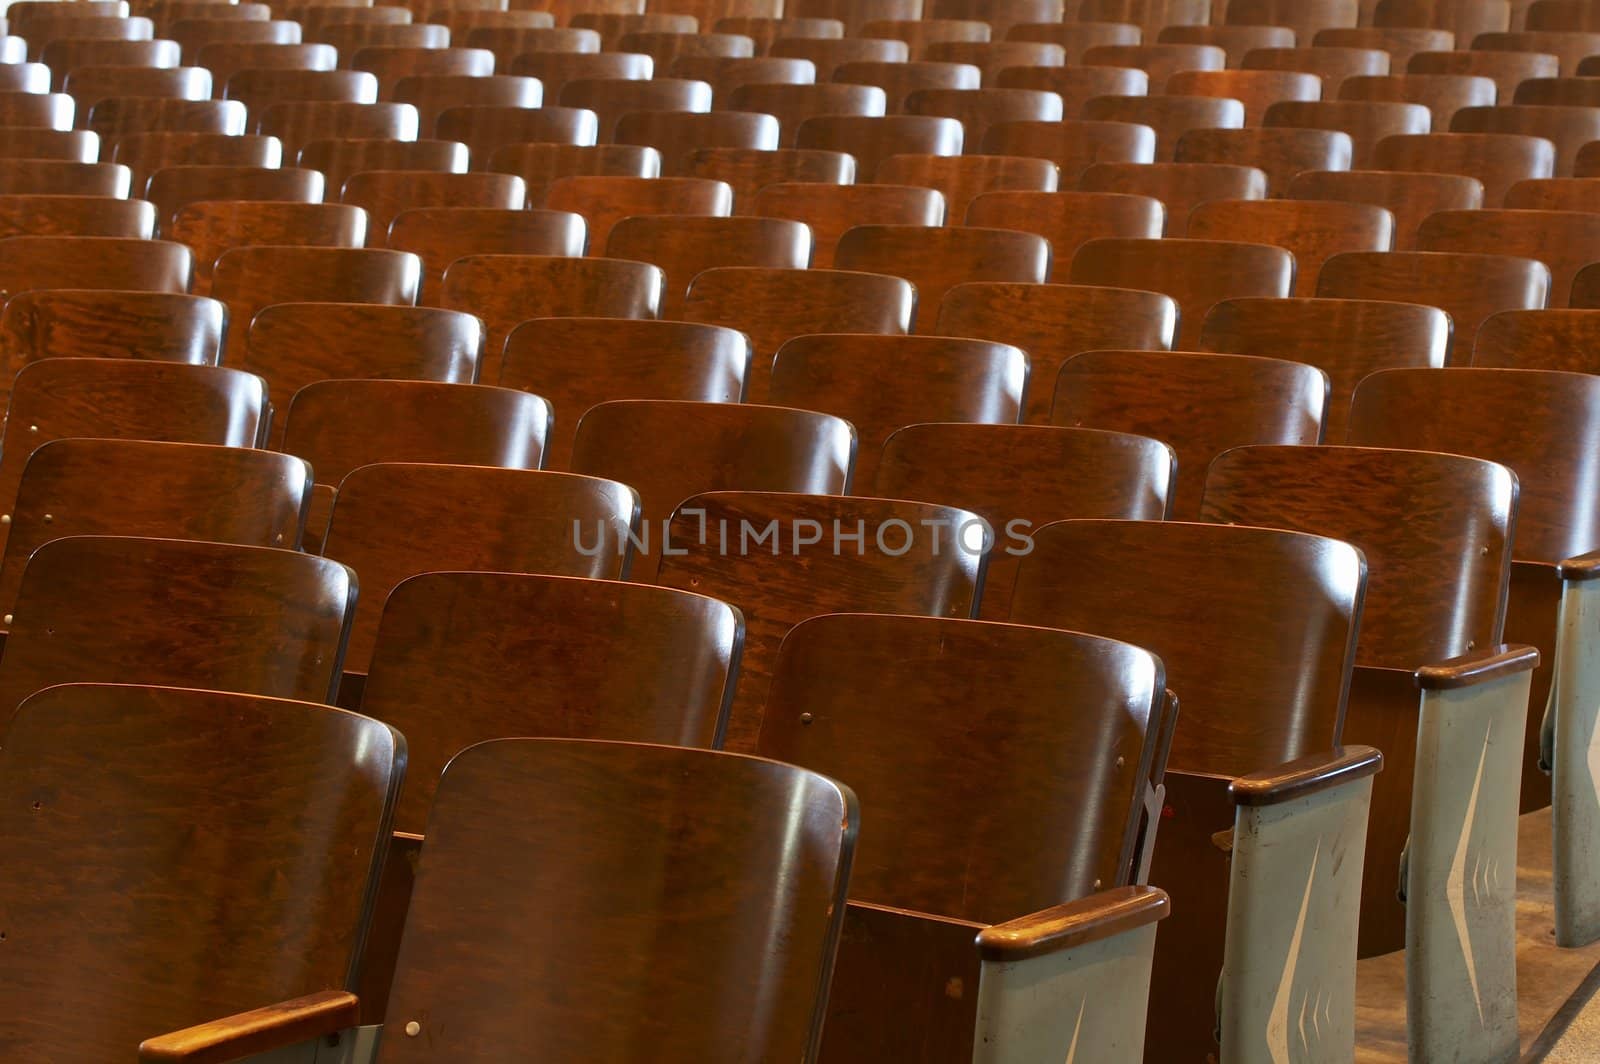 rows of wood chairs in an old auditorium